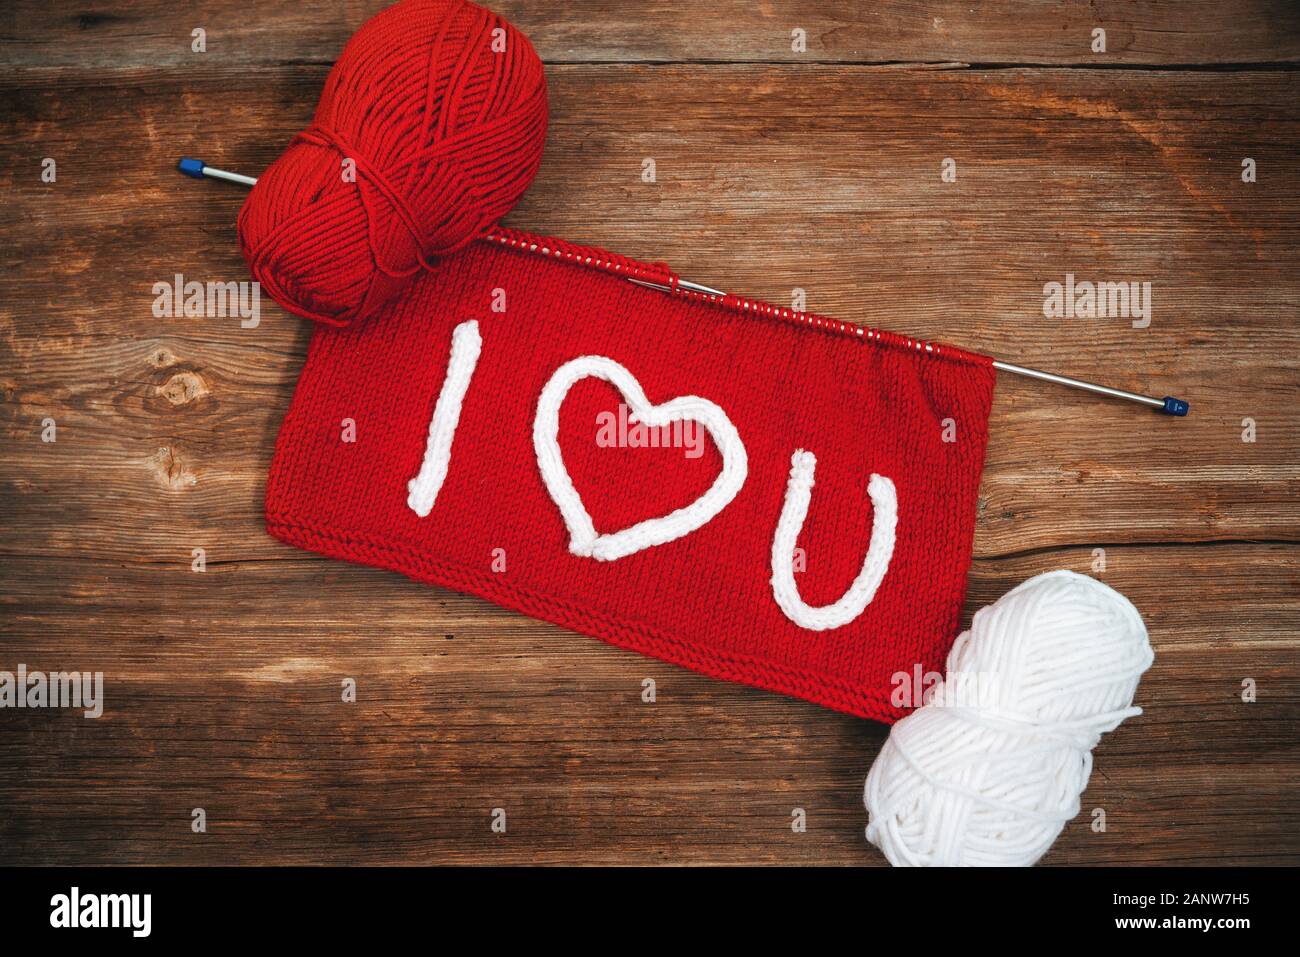 Writing I Love You on knitting with needlework. Valentines day concept Stock Photo